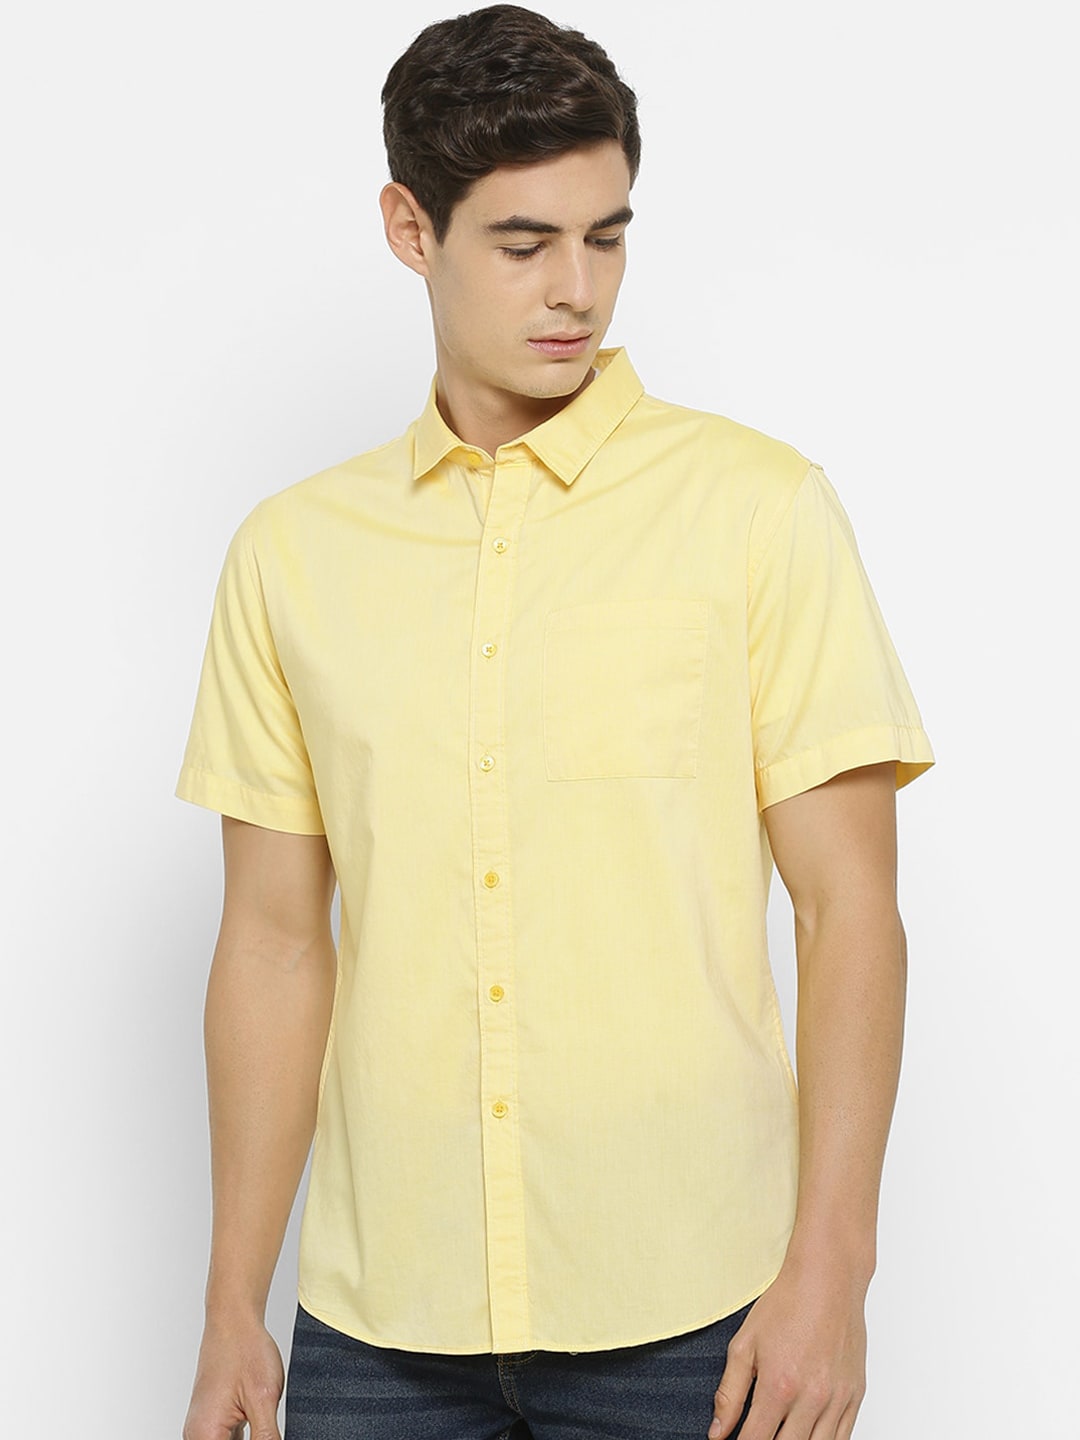 FOREVER 21 Men Yellow Slim Fit Solid Casual Shirt